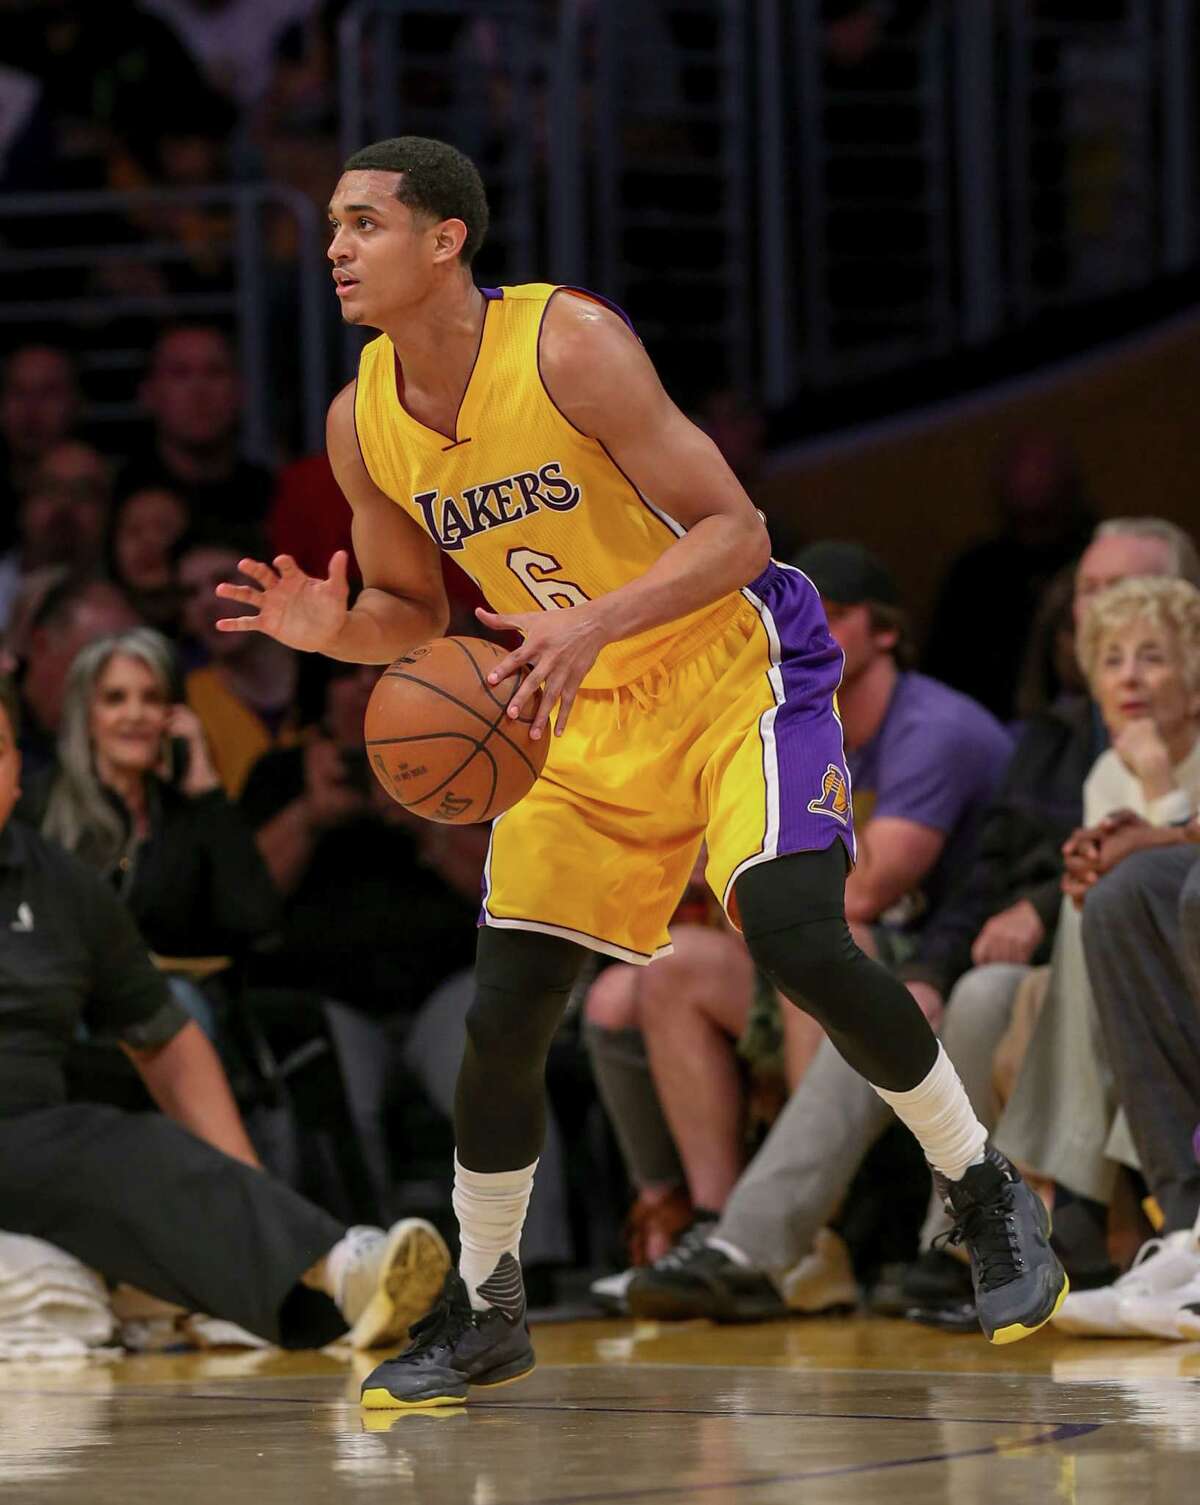 Los Angeles Lakers guard Jordan Clarkson (6) in actions during the first half of an NBA basketball game against Orlando Magic Tuesday, March 8, 2016, in Los Angeles.